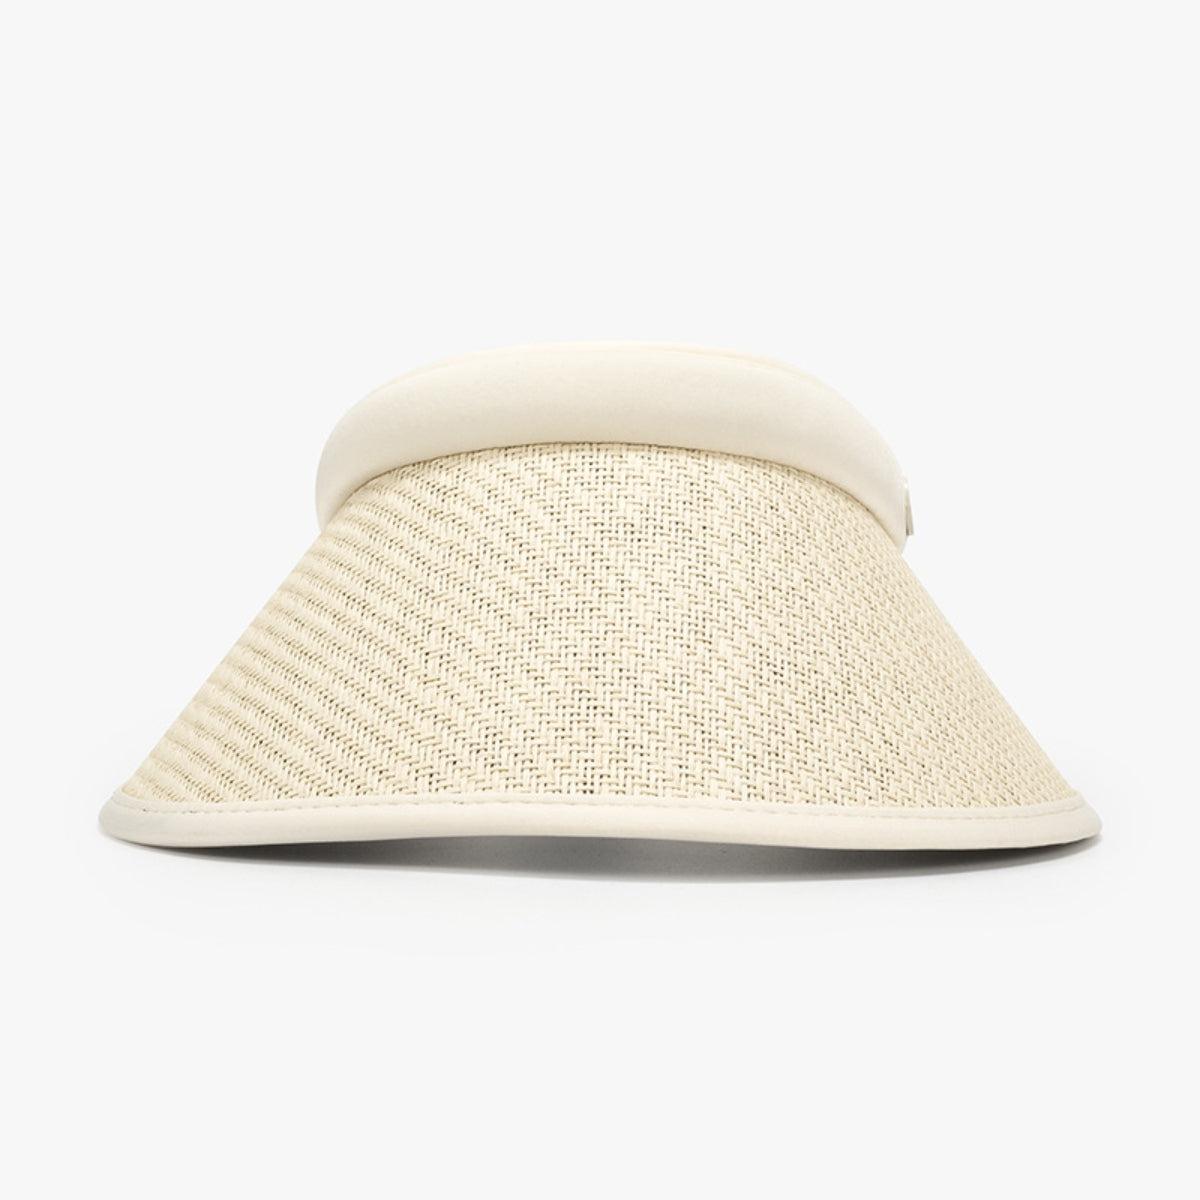 a white hat on a white background